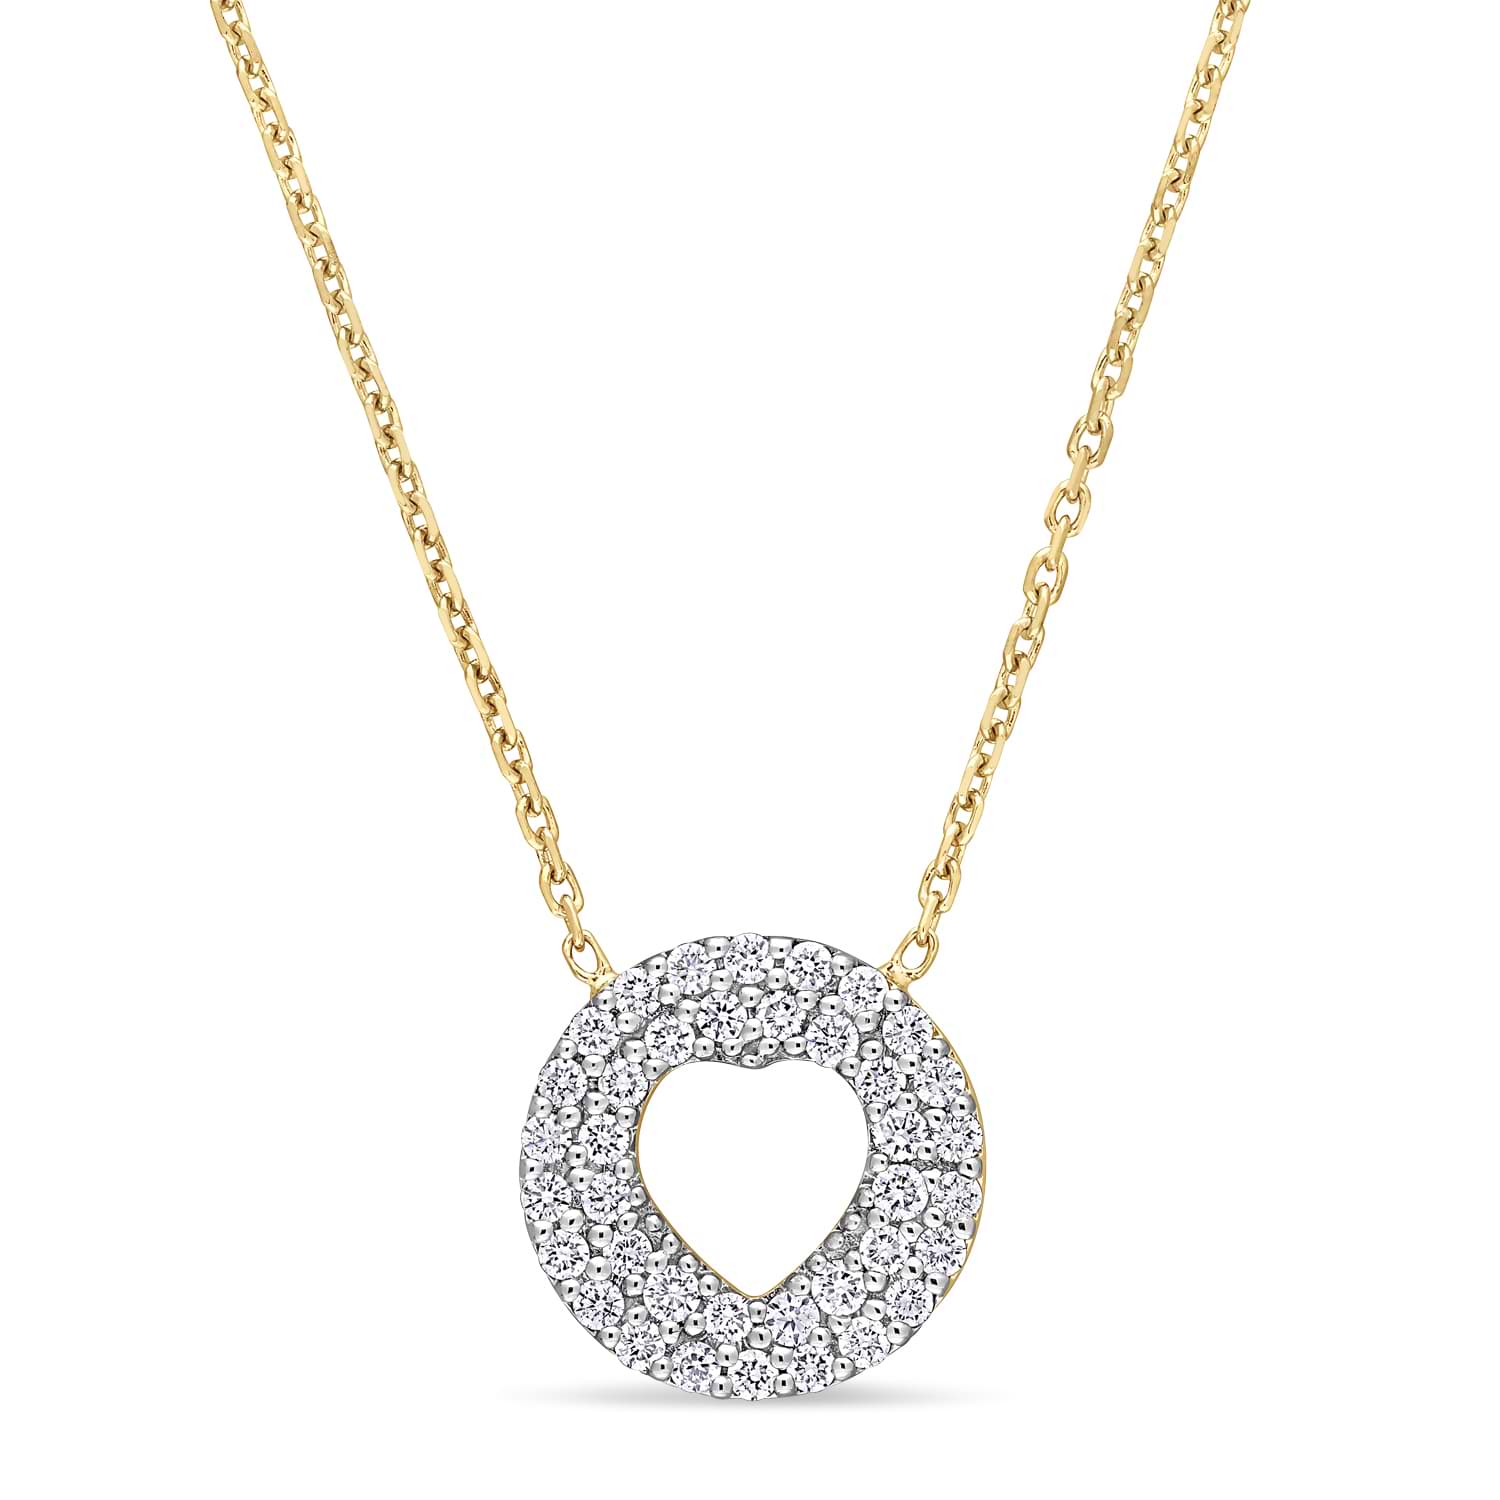 Round Diamond Inverted Heart Pendant Necklace 18k Yellow Gold (0.30 ct)